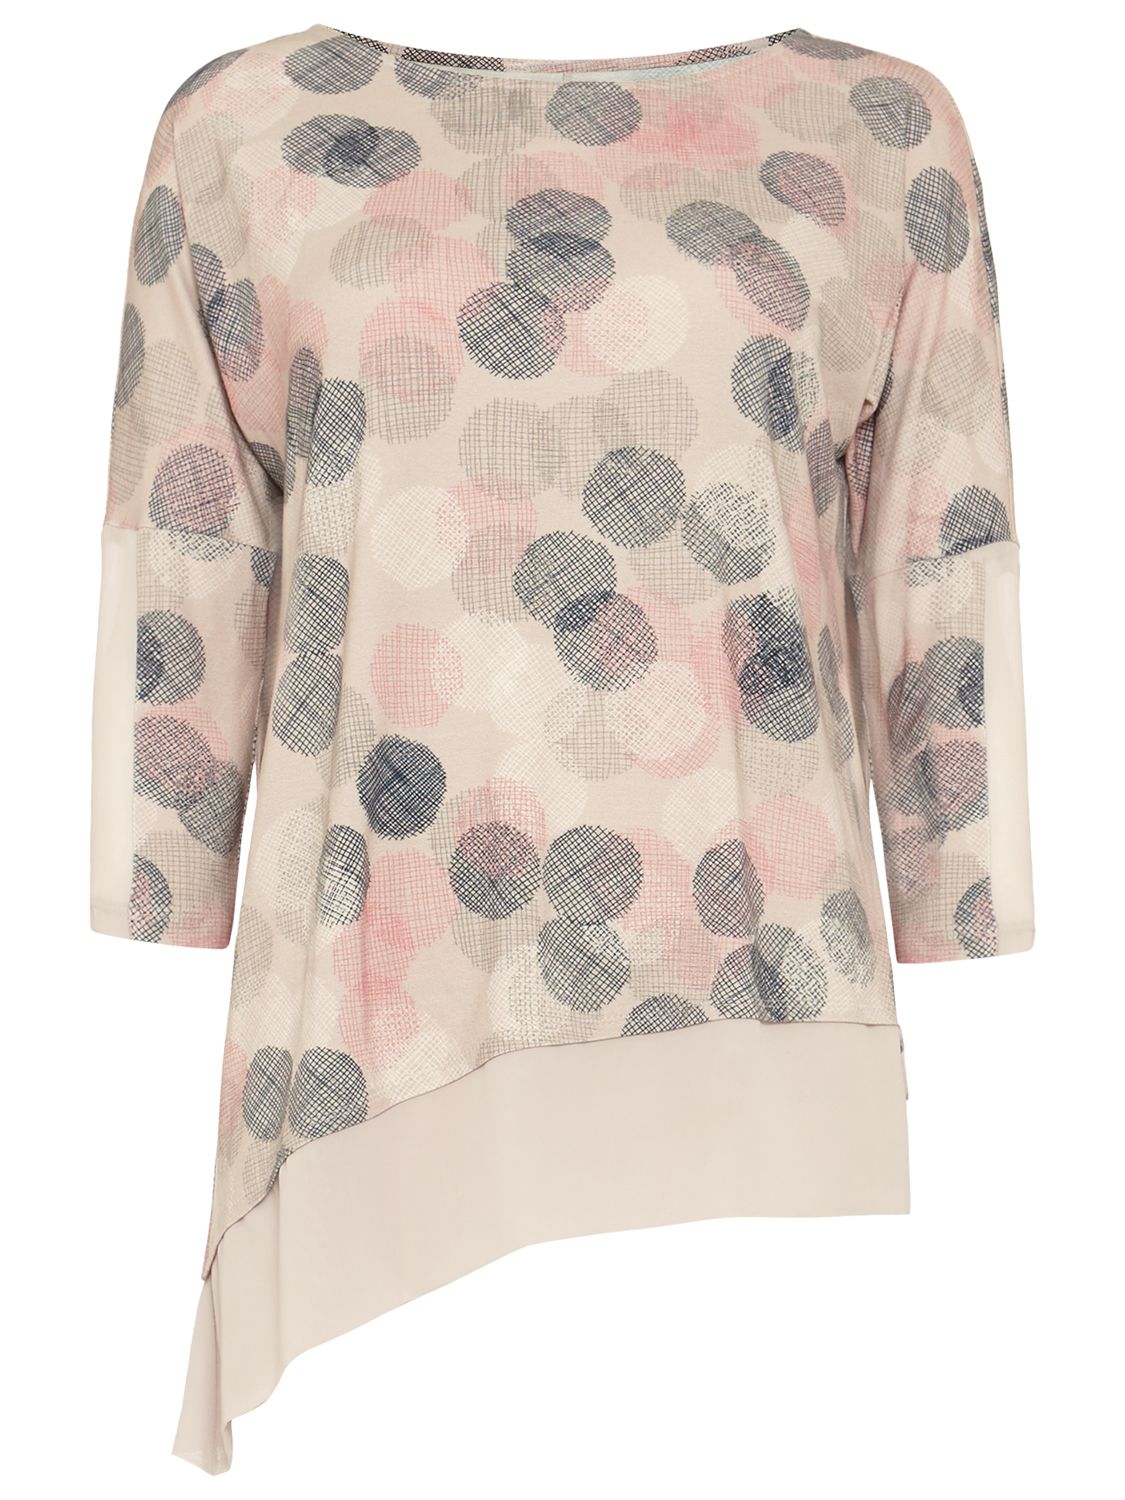 Phase Eight Ediline Etched Spot Top, Ivory/Multi